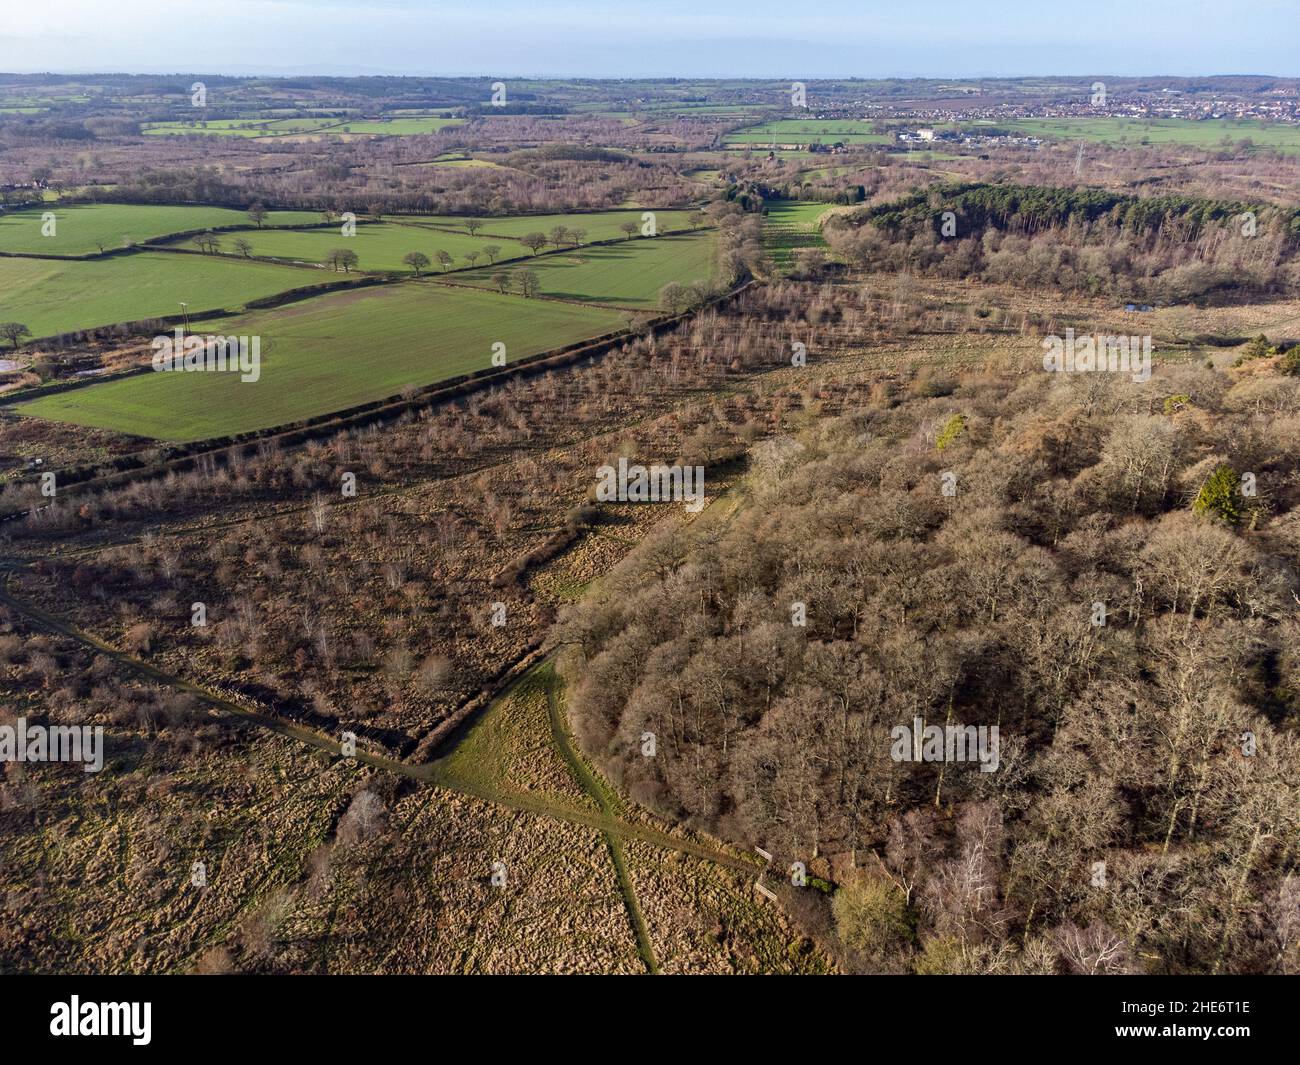 Drab colourless trees in winter in the Warwickshire countryside, England as seen from the air. Stock Photo